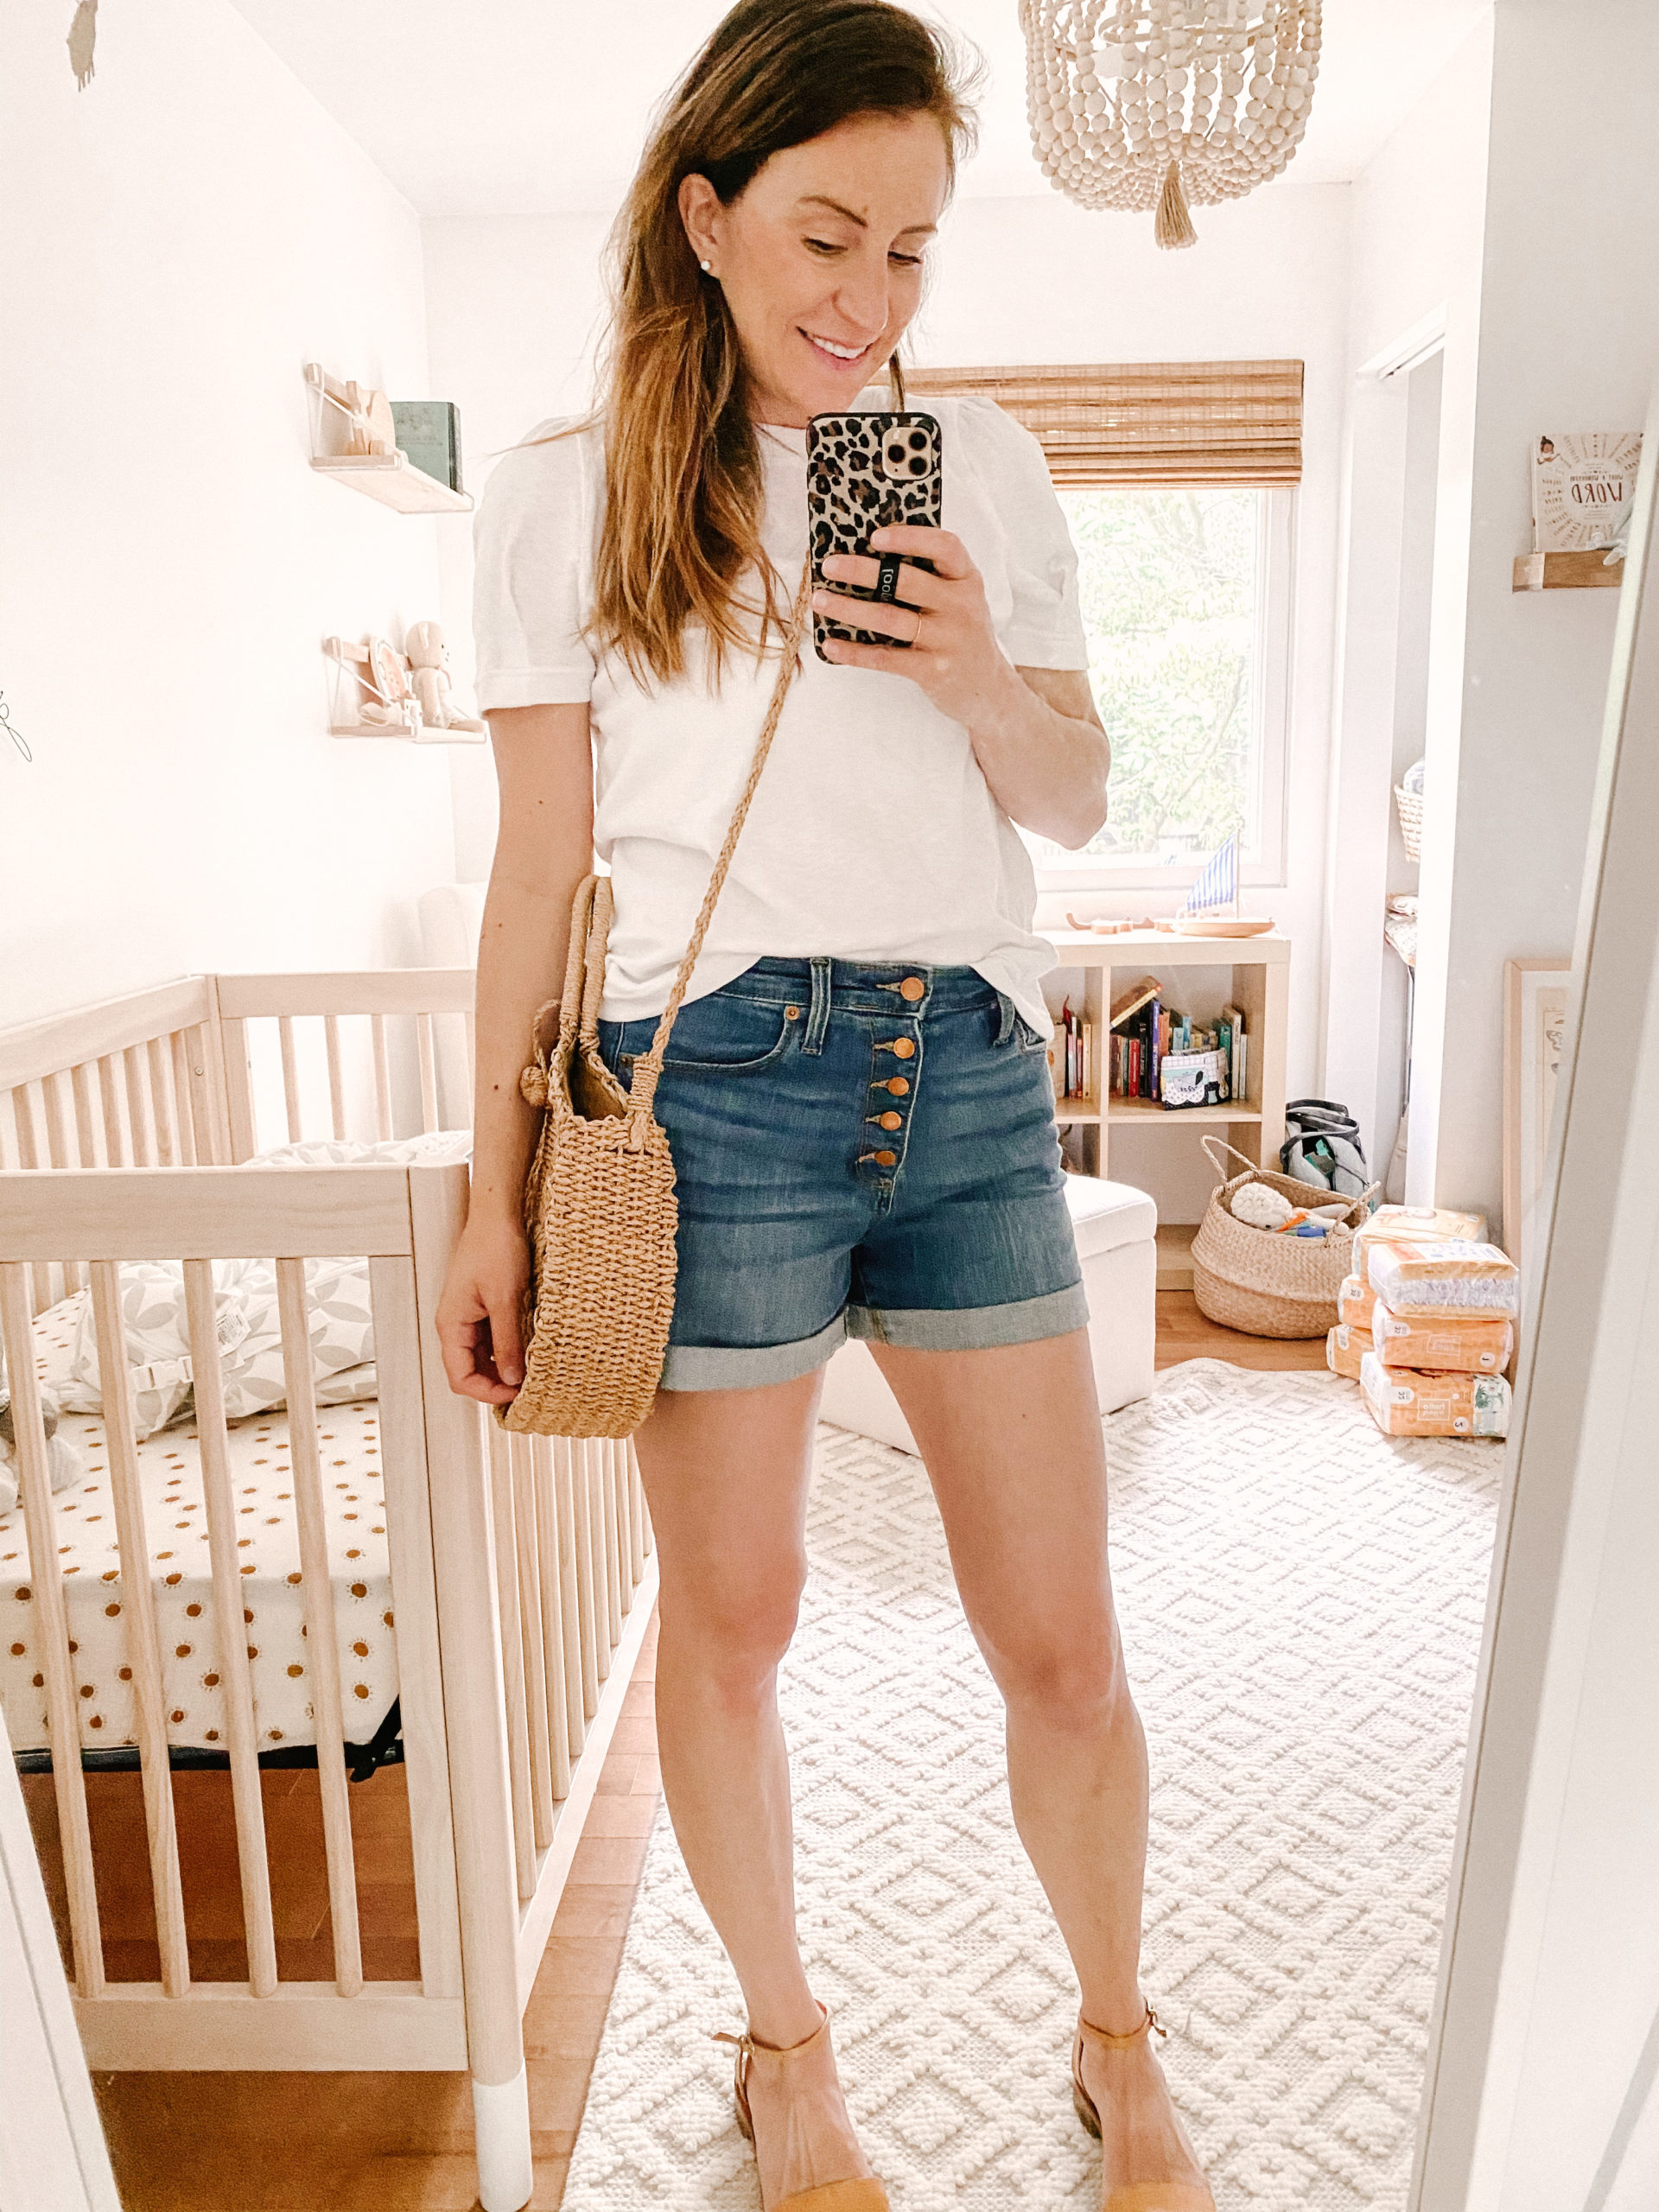 Postpartum Clothes Try-On - The Mama Notes